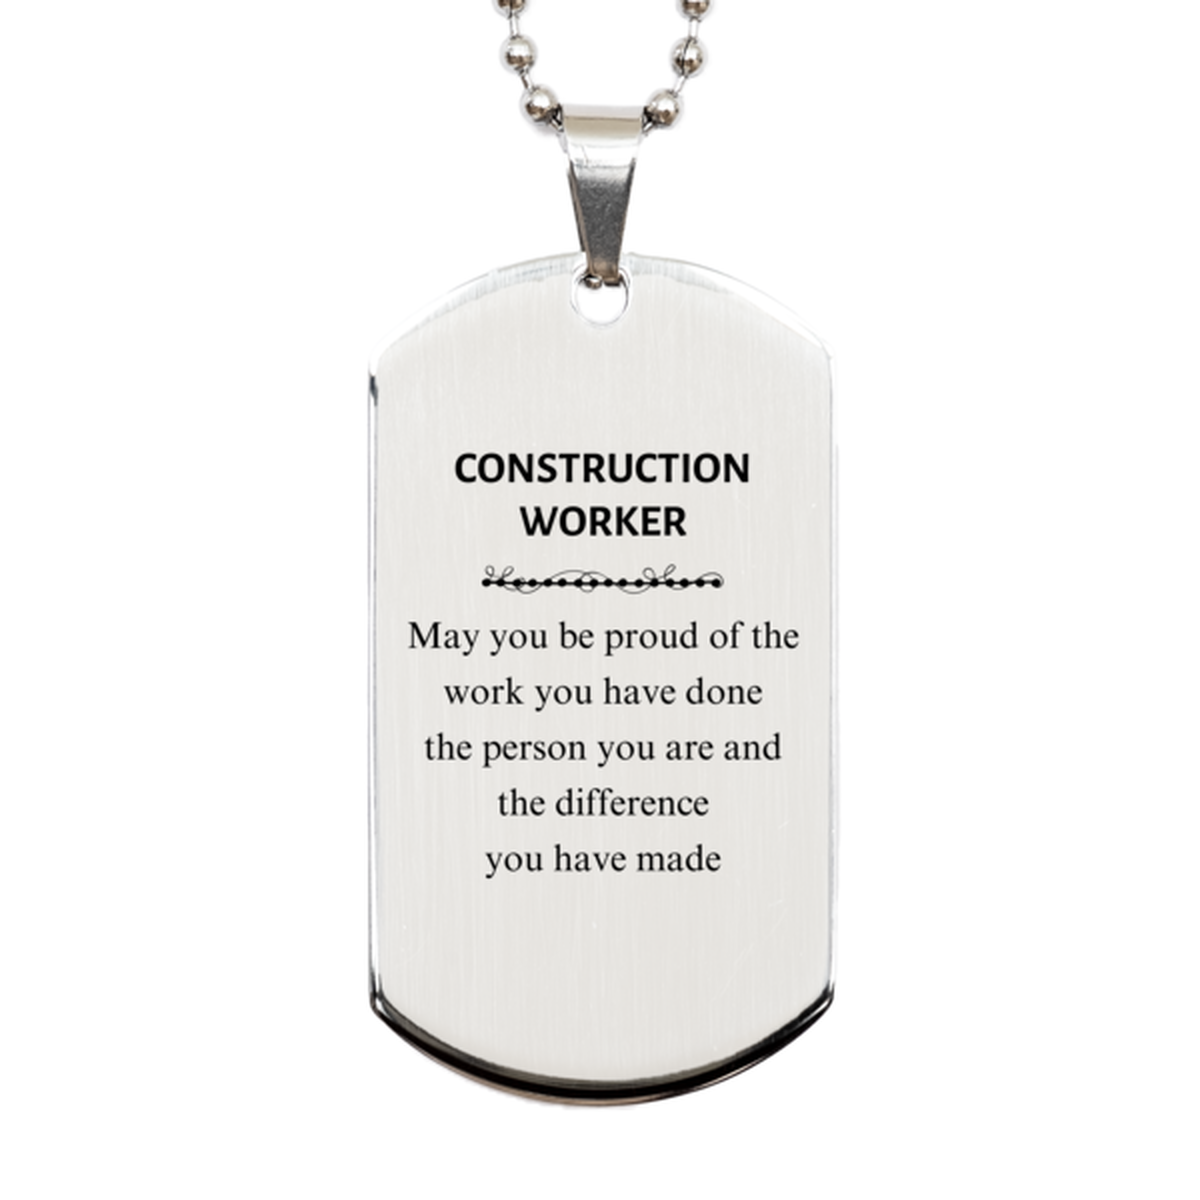 Construction Worker May you be proud of the work you have done, Retirement Construction Worker Silver Dog Tag for Colleague Appreciation Gifts Amazing for Construction Worker